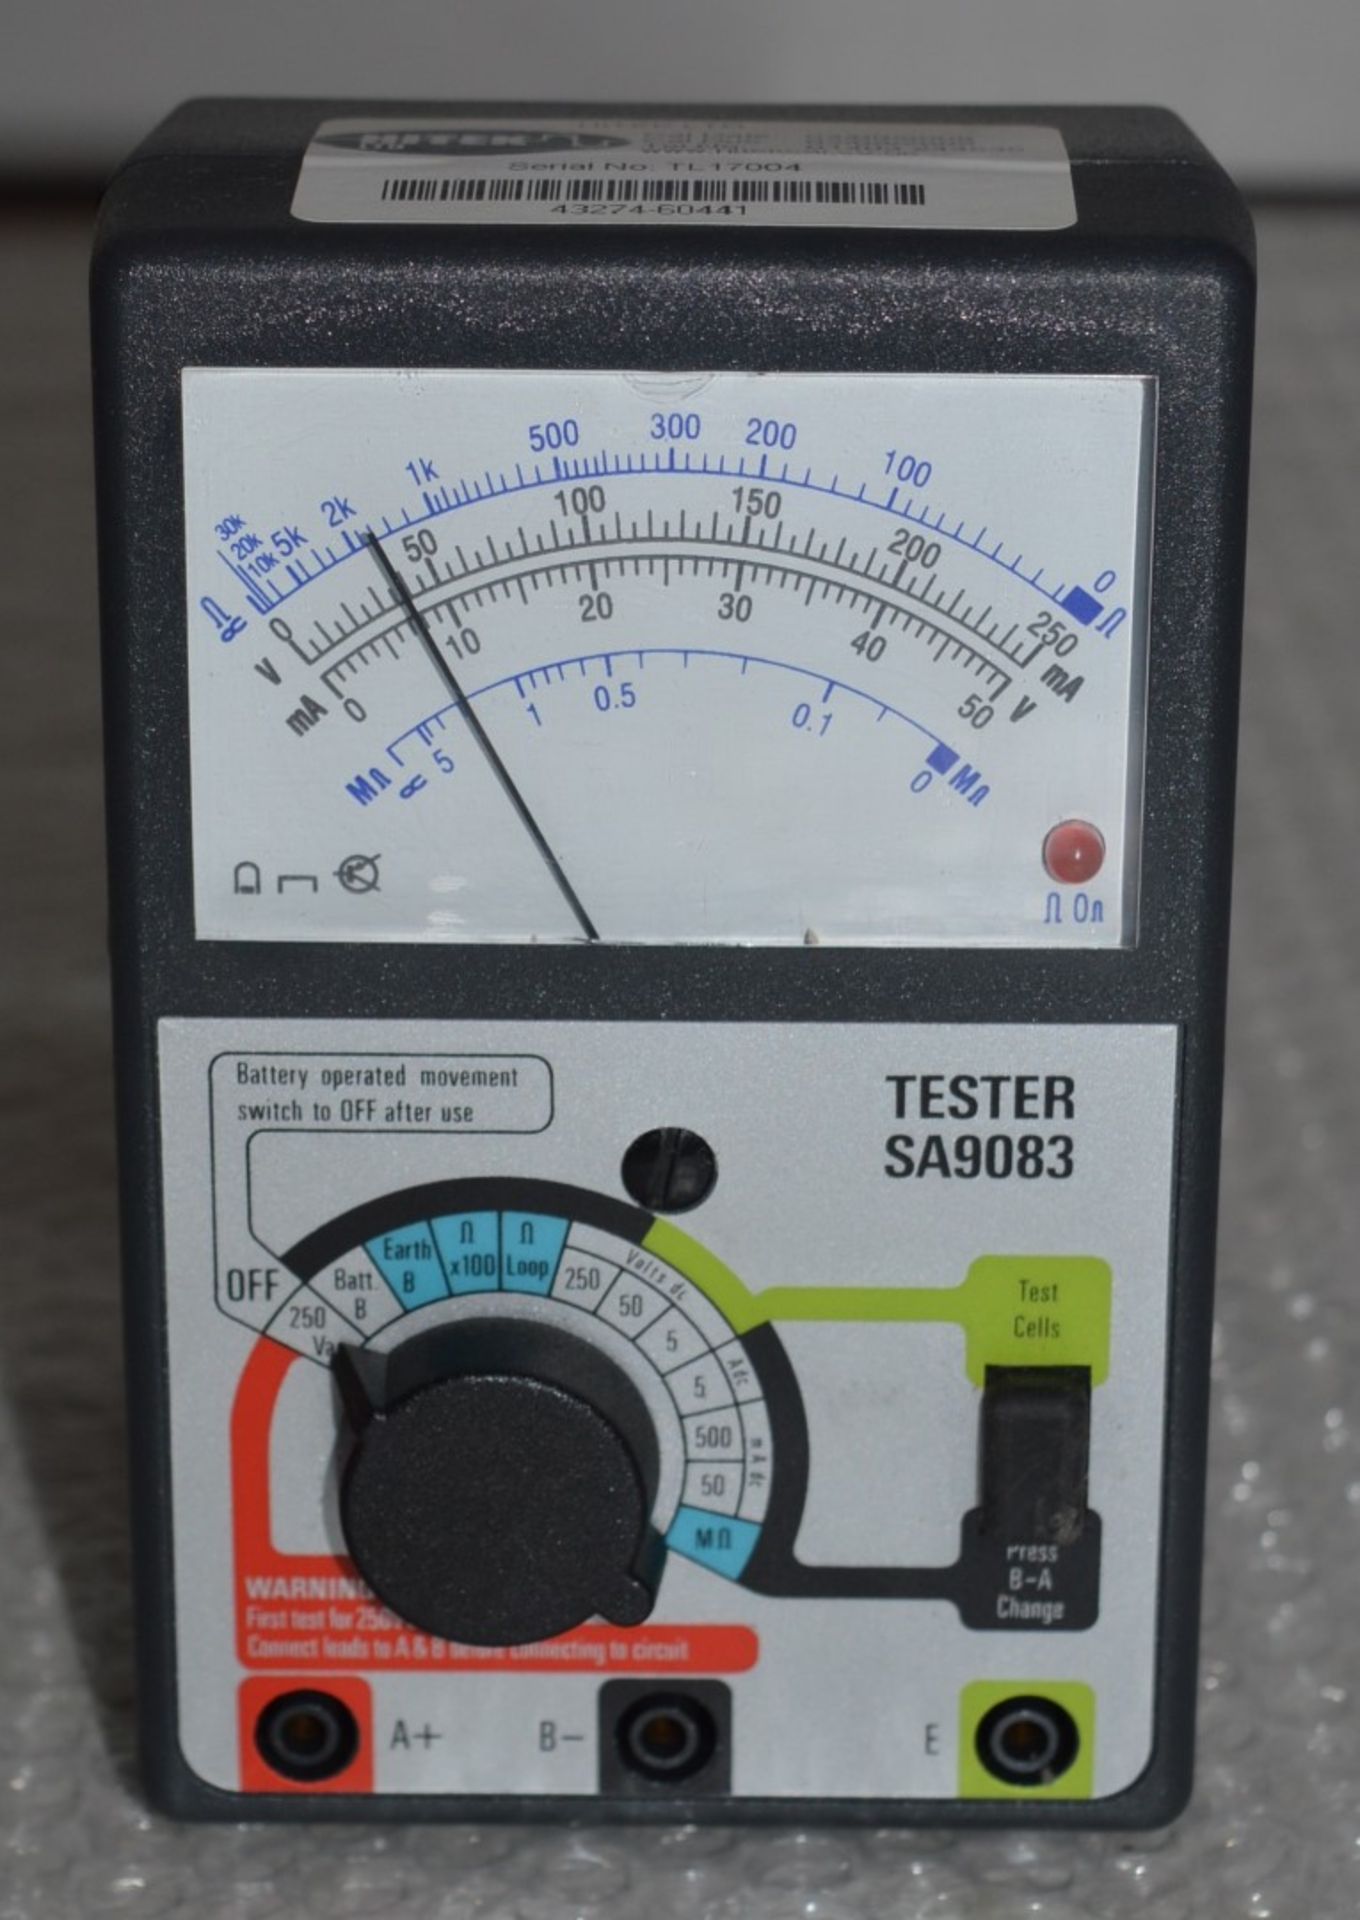 1 x Mills SA9083 Multimeter - Suitable For Telephone Engineers in Maintenance Testing - With Carry - Image 5 of 8